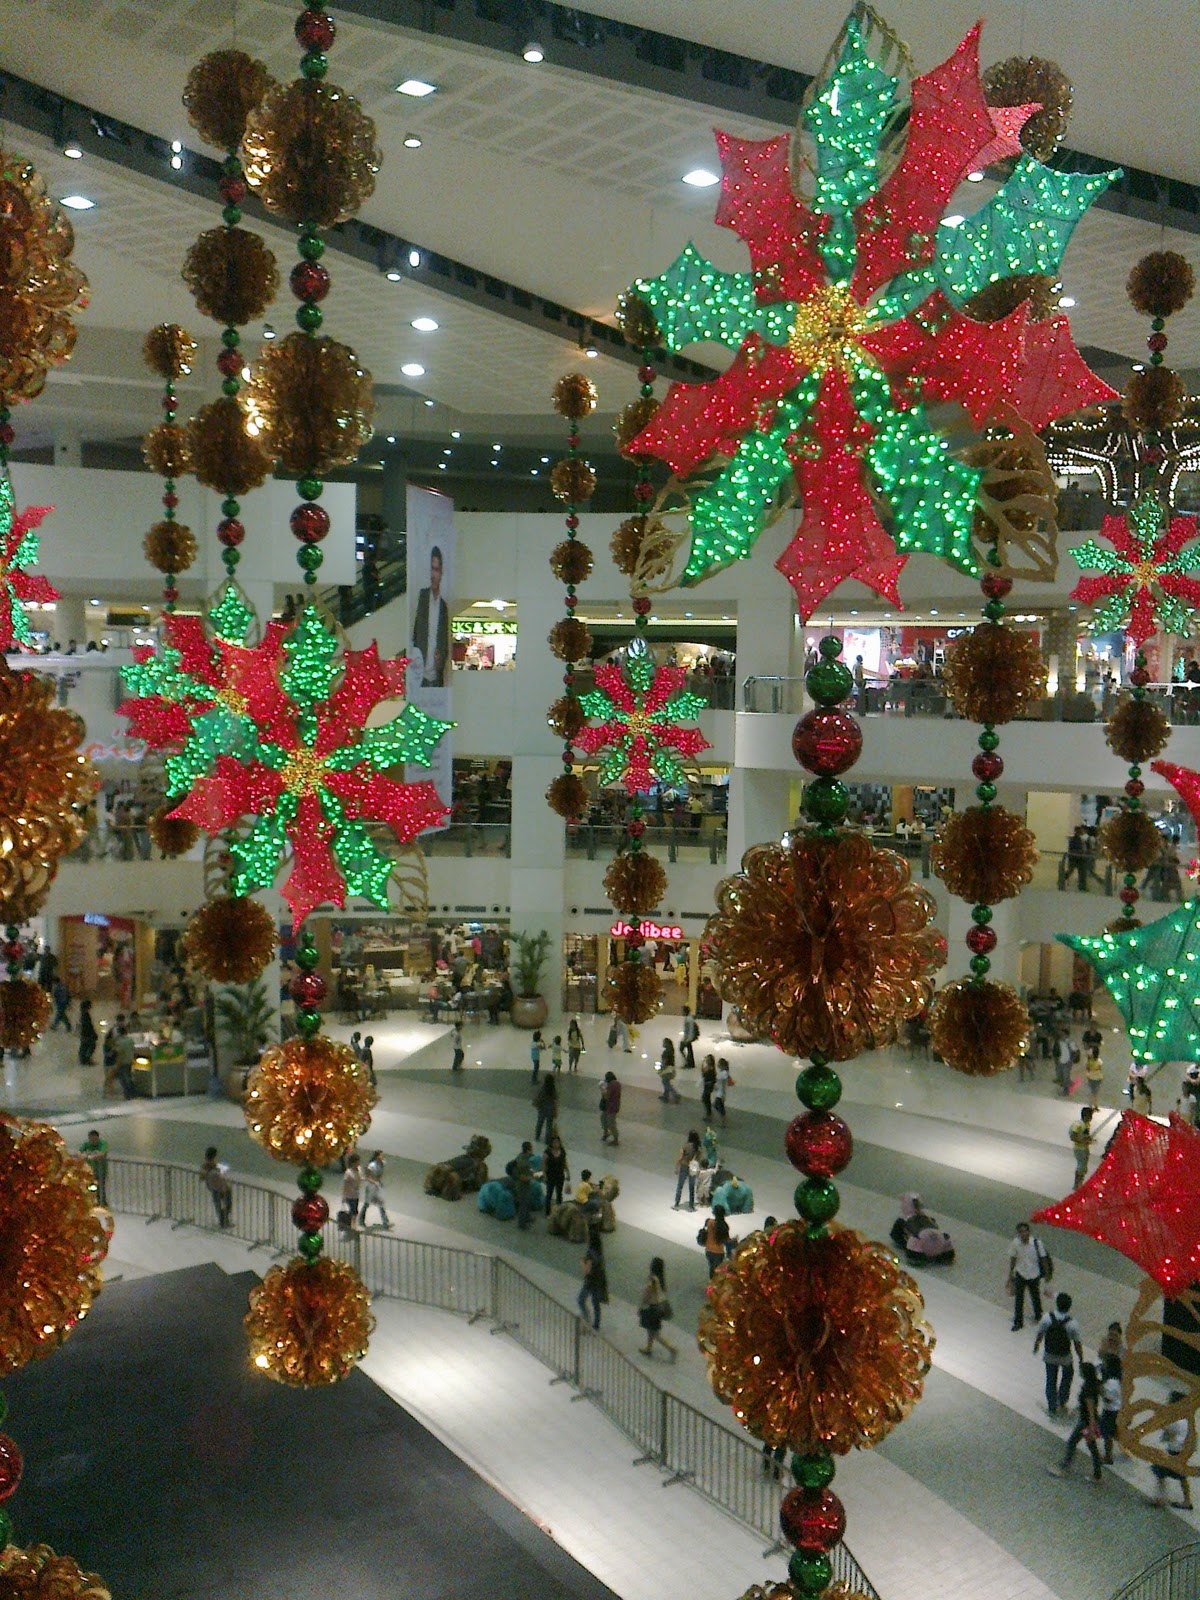 Scant Christmas  Decorations  in Shopping Malls Before the 